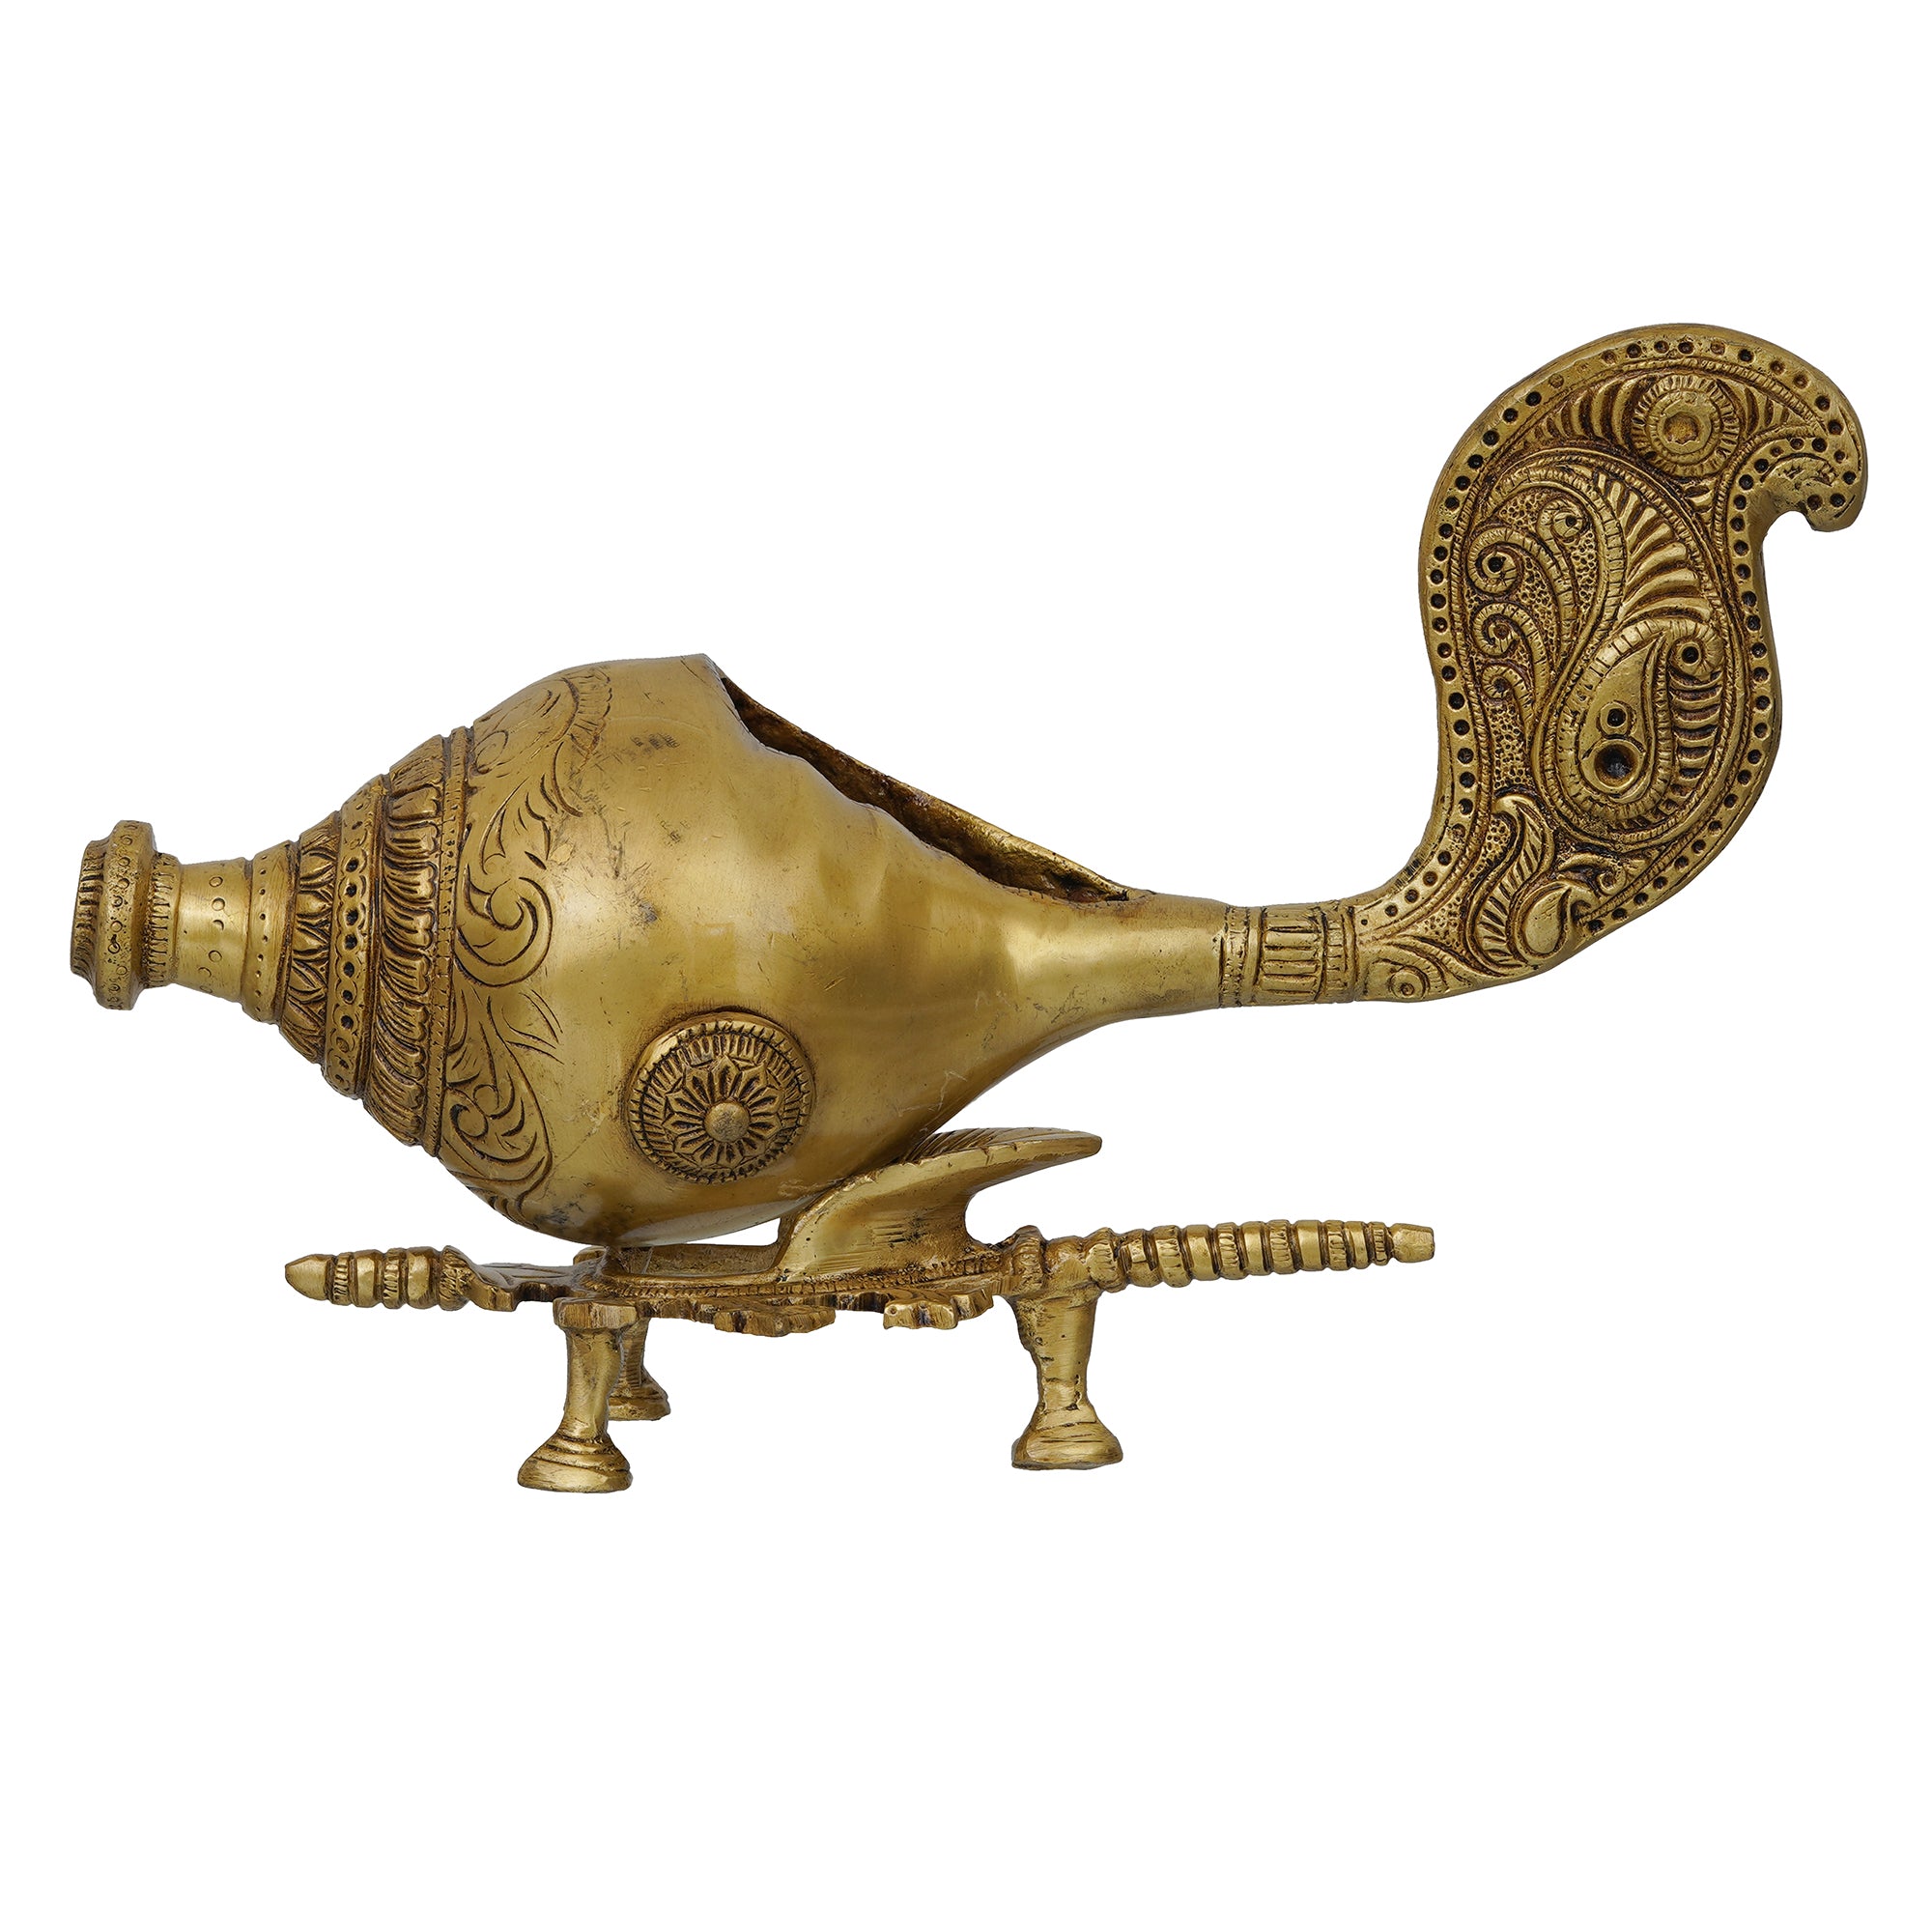 Golden Shankh (Conch) with a Stand Decorative Handcrafted Brass Showpiece 2